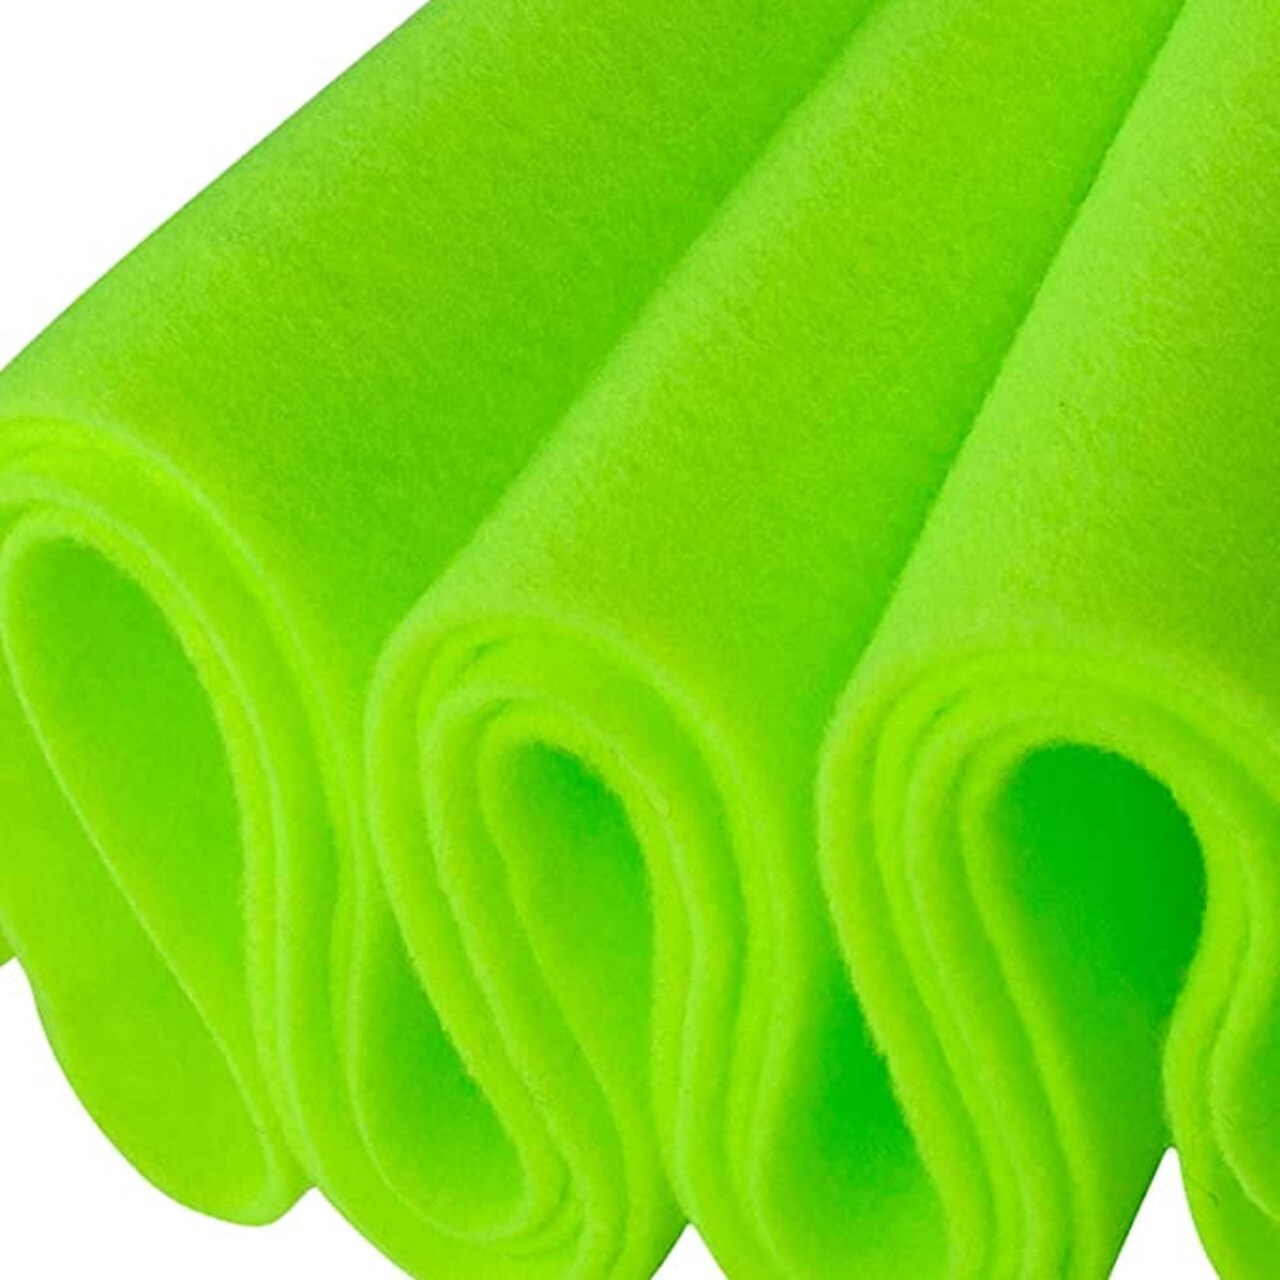 FabricLA Craft Felt Fabric - 18 X 18 Inch Wide & 1.6mm Thick Felt Fabric  - Neon Green A54 - Use This Soft Felt for Crafts - Felt Material Pack